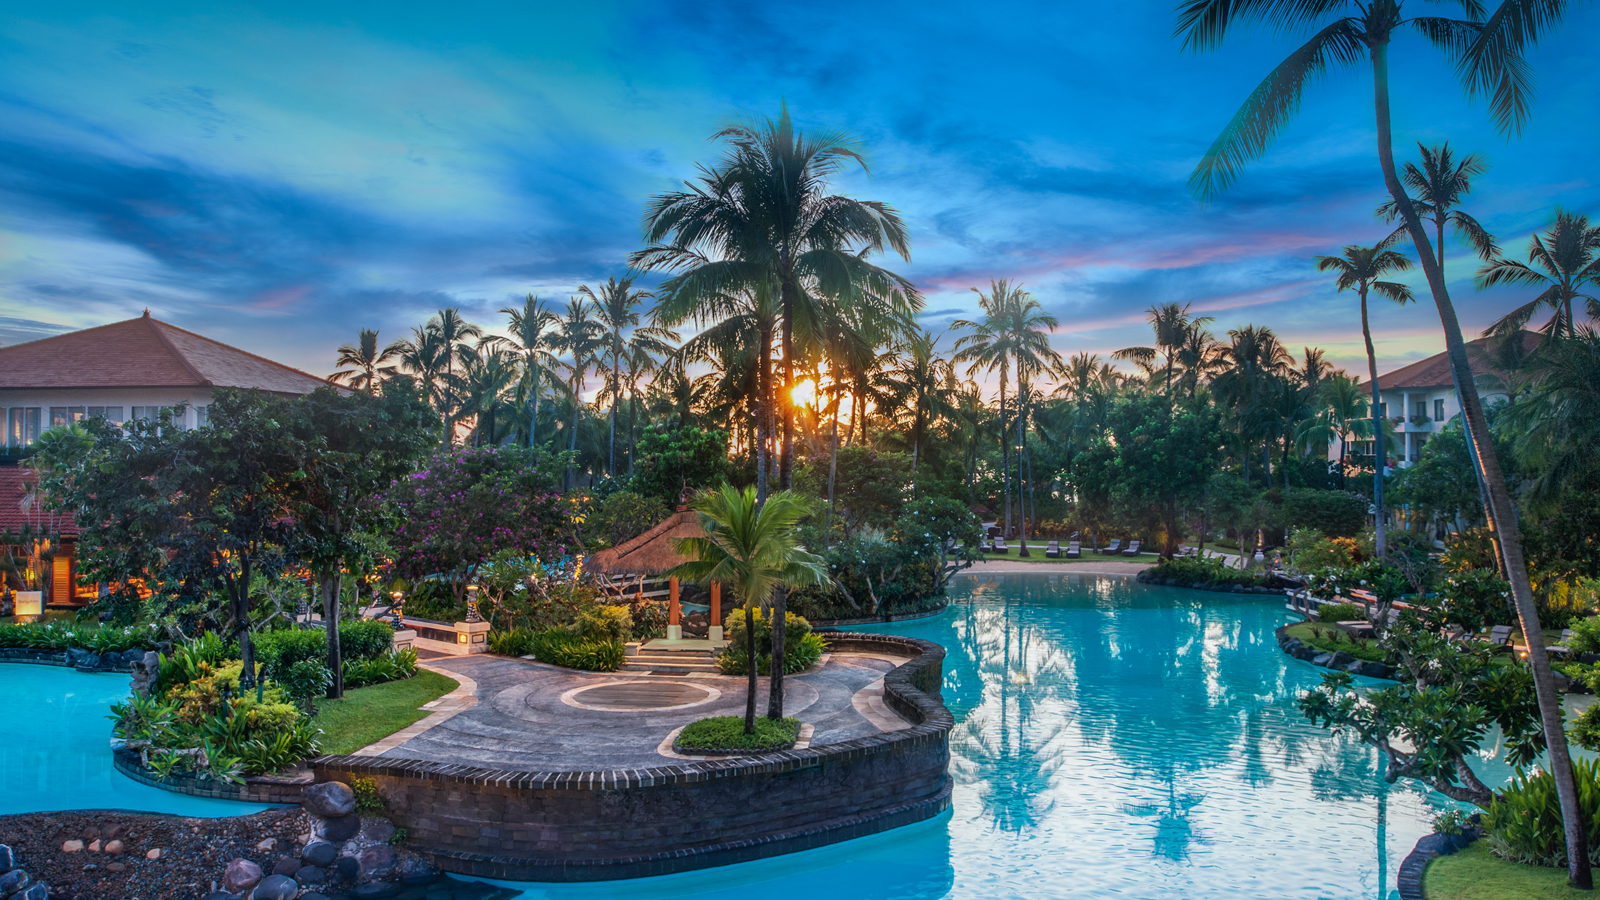 Which Of These 16 Exotic Hotels In Bali Will You Escape To In 2016?